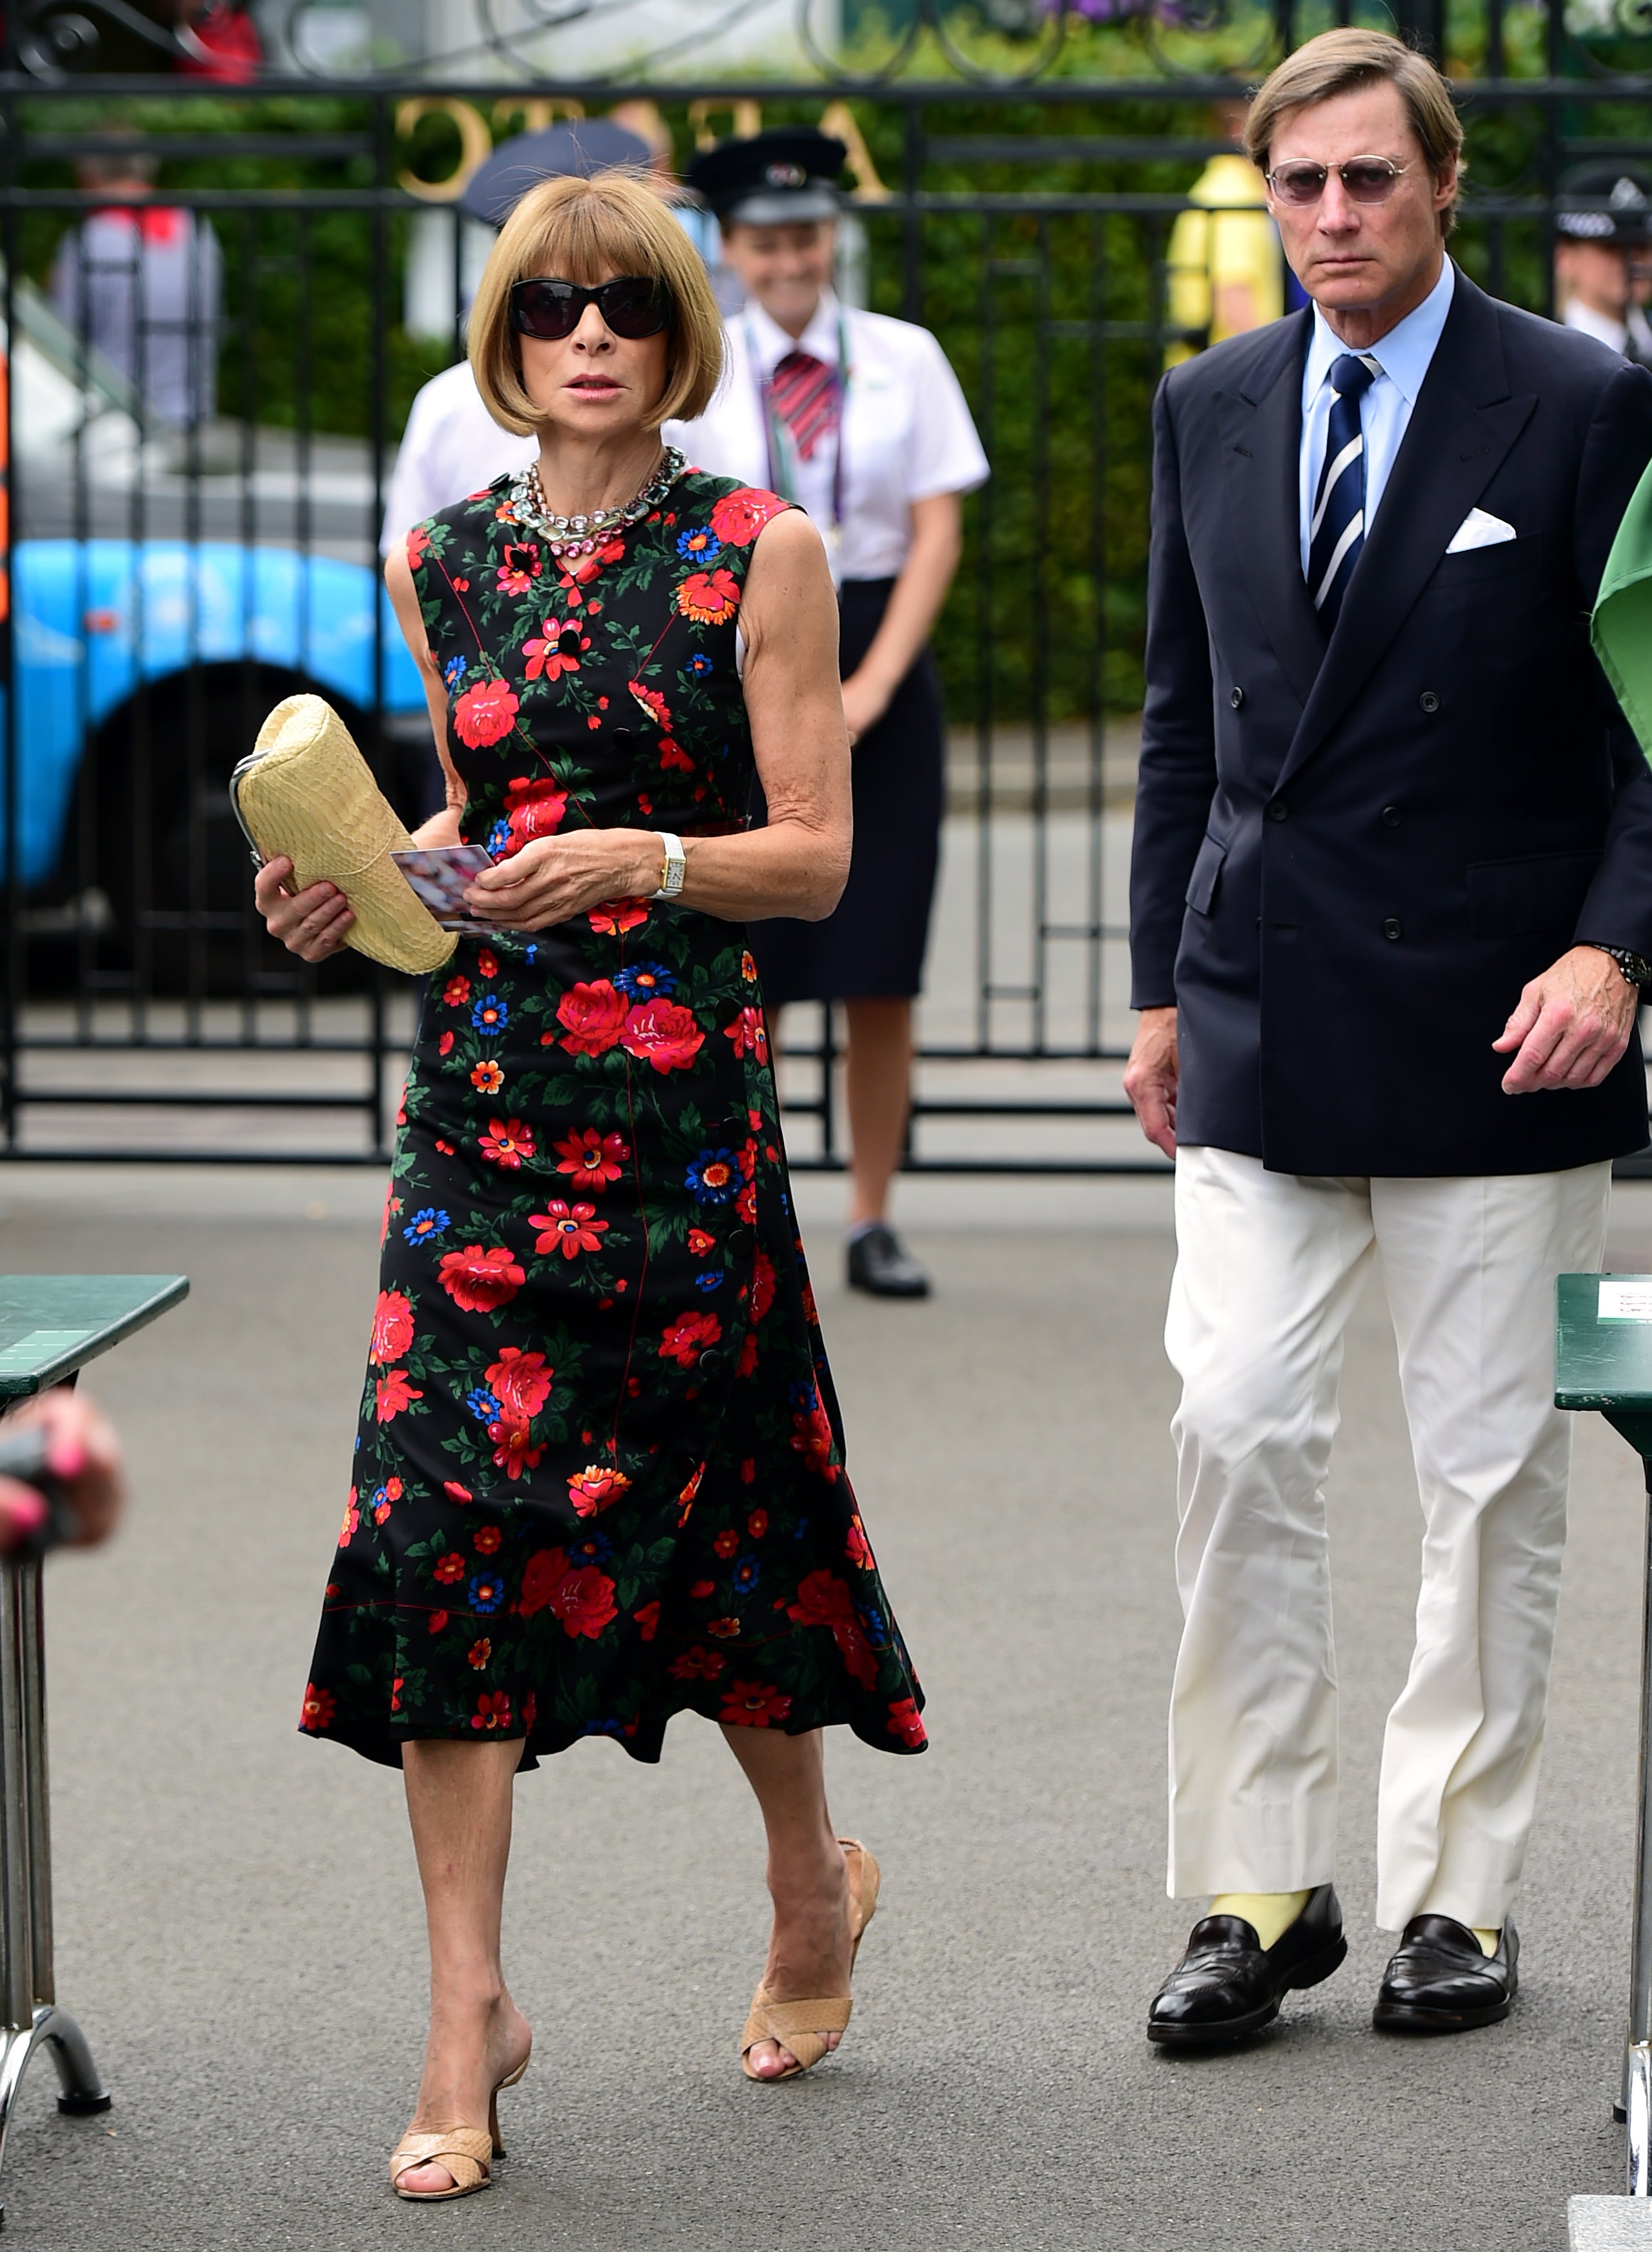 Anna Wintour and Shelby Bryan arriving on day Twelve of the Wimbledon Championships at the All England Lawn Tennis and Croquet Club, Wimbledon.